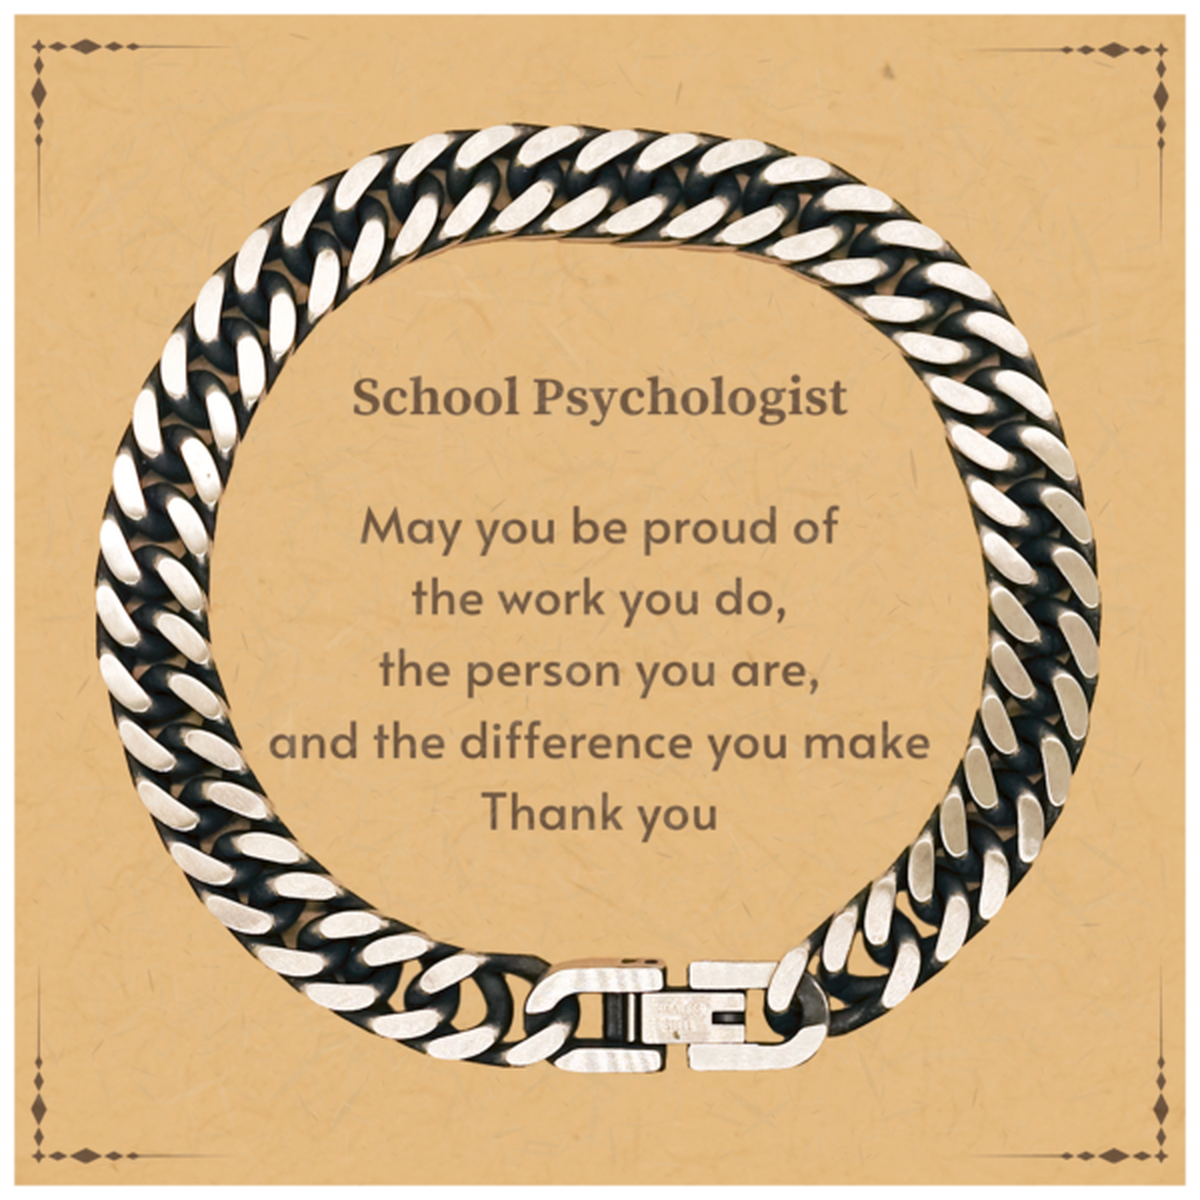 Heartwarming Cuban Link Chain Bracelet Retirement Coworkers Gifts for School Psychologist, School Psychologist May You be proud of the work you do, the person you are Gifts for Boss Men Women Friends